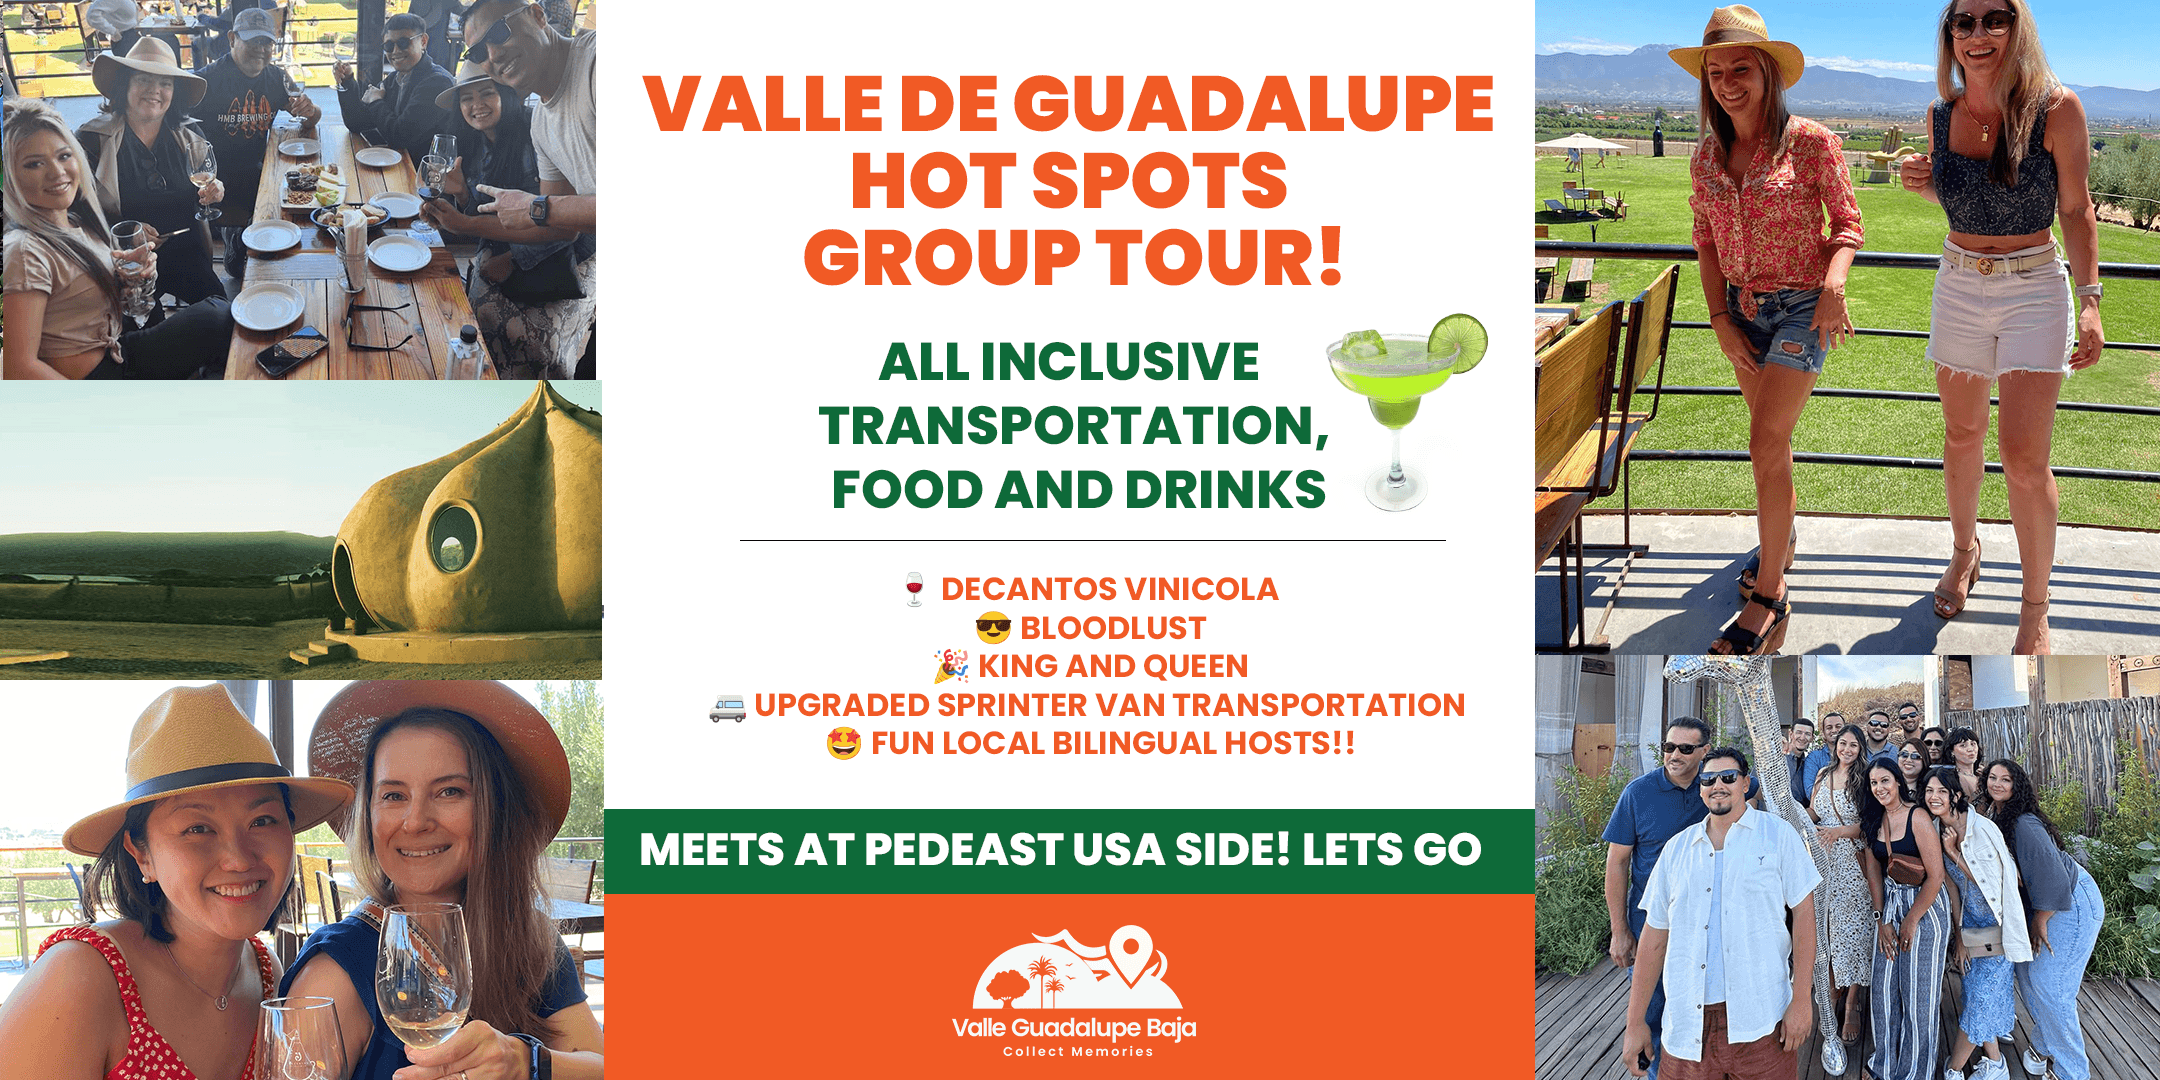 Valle de Guadalupe Hot Spots Group Tour from USA Side Pedeast!